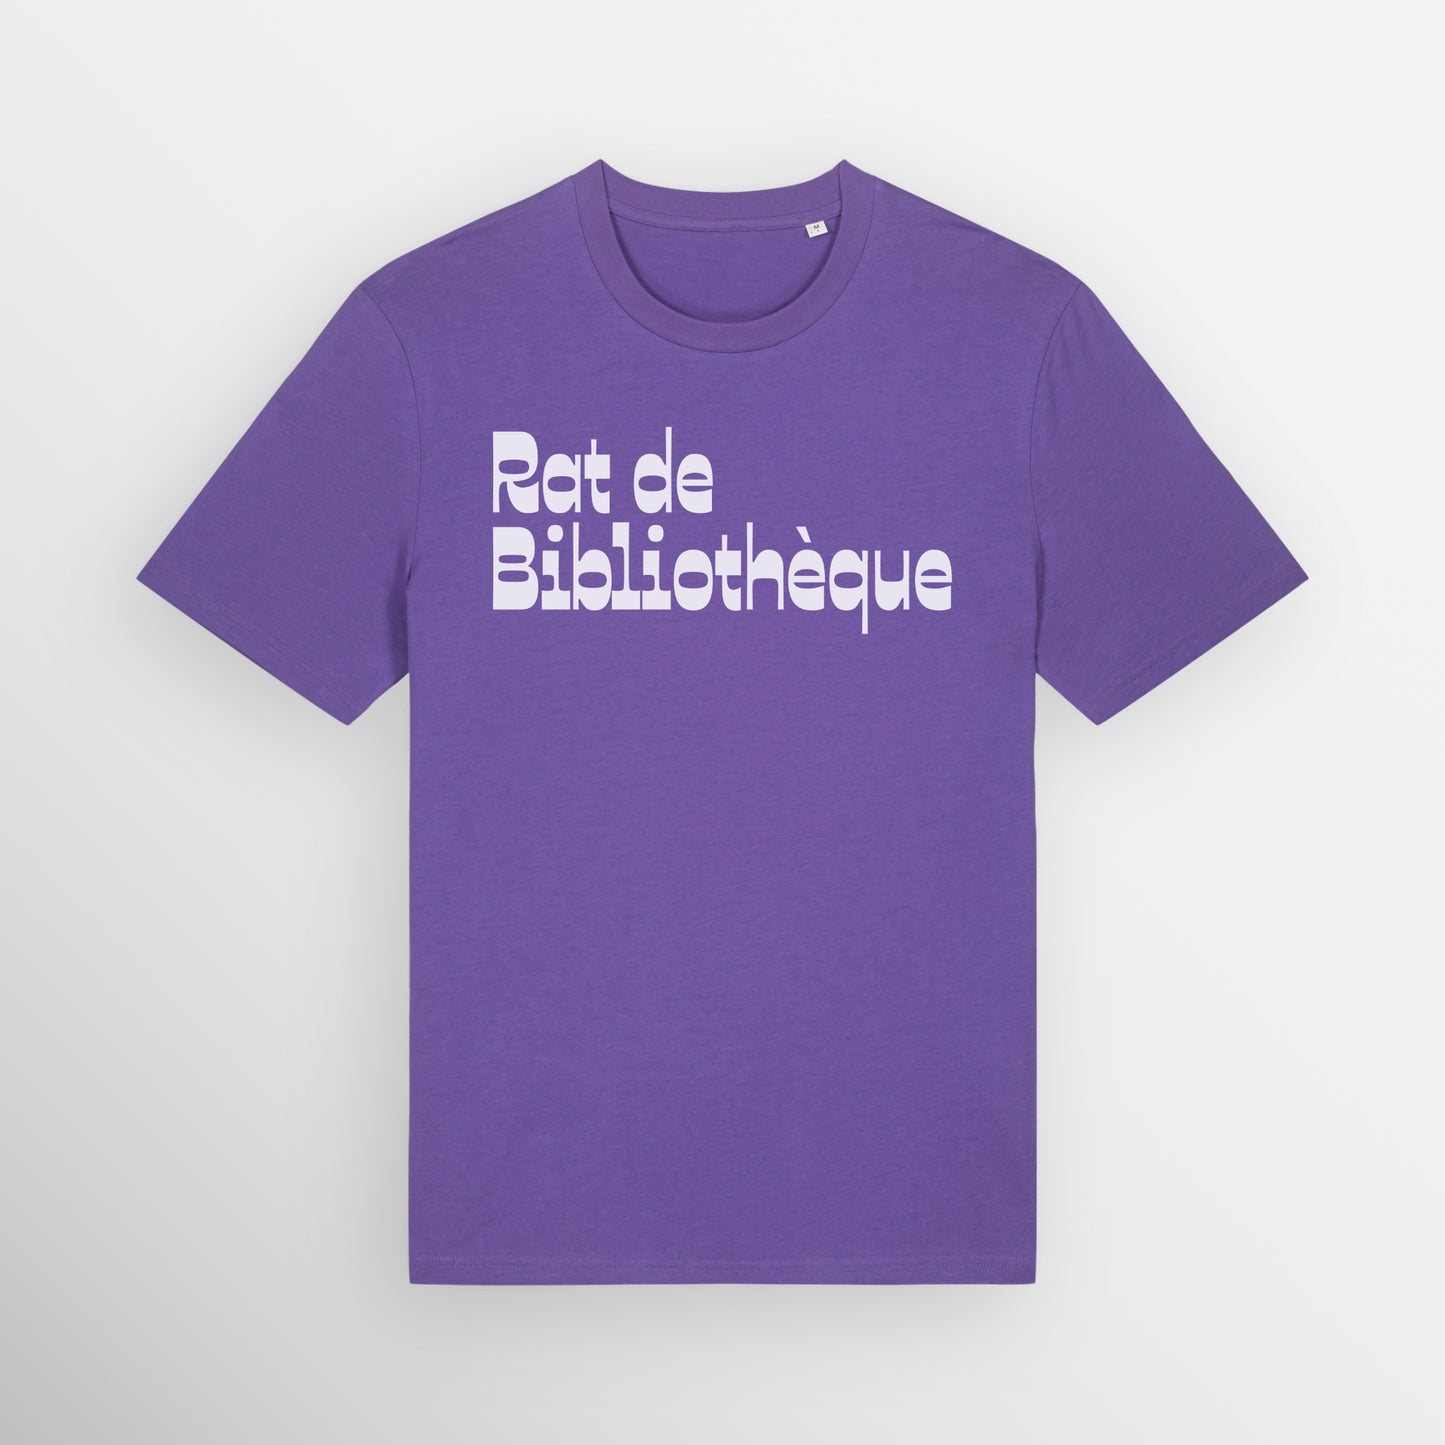 Purple coloured regular fit t-shirt with Rat de Bibliothèque written on the front in white, which is French for bookworm.